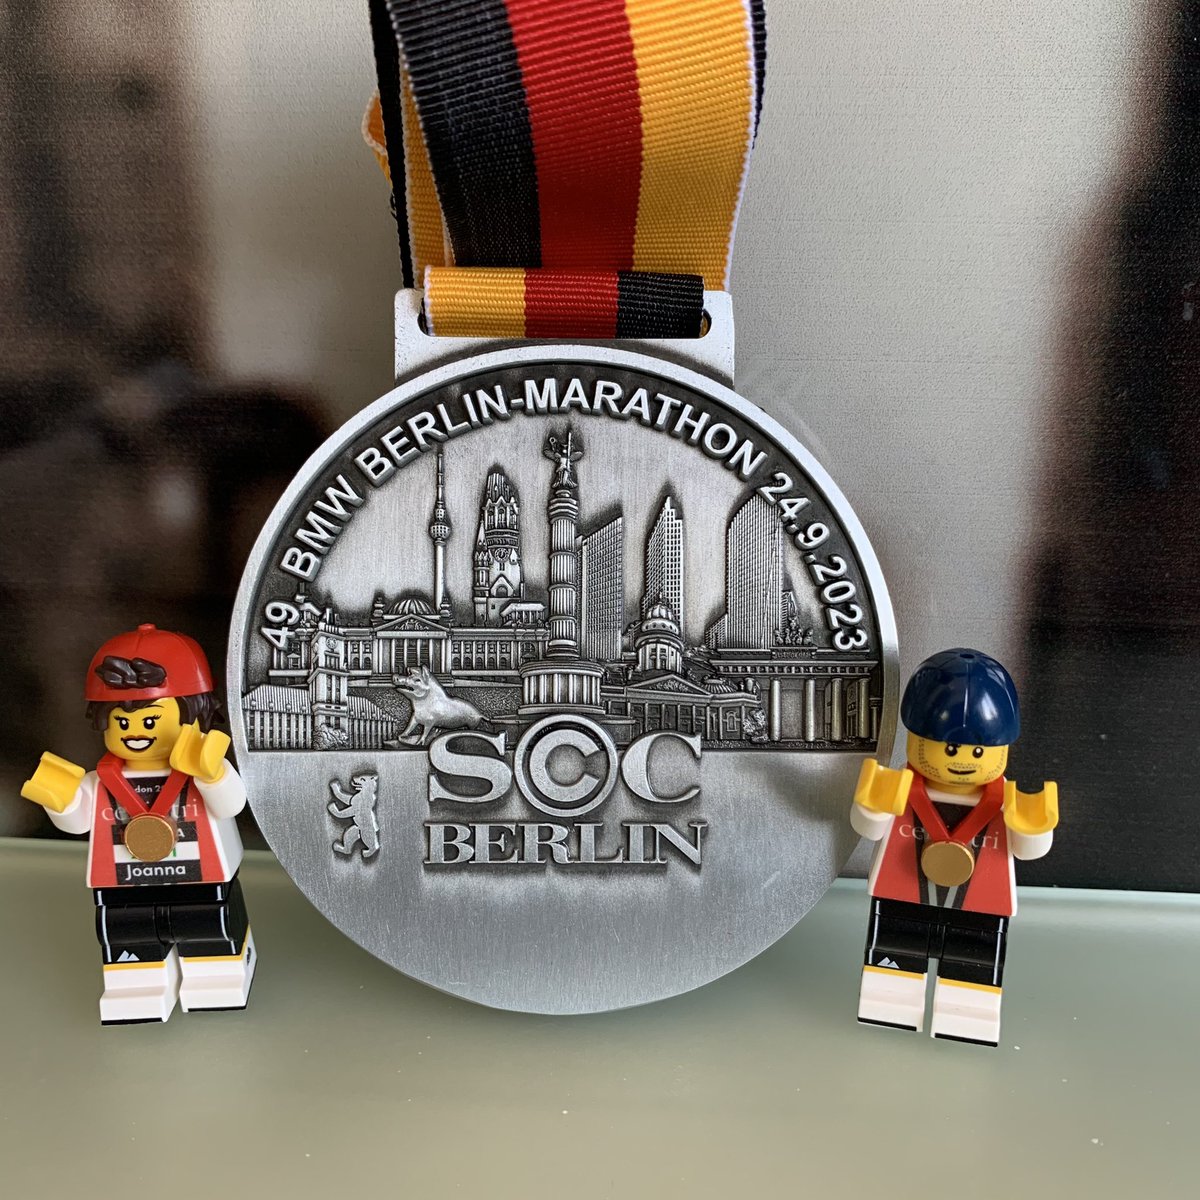 3 down, 3 to go for the Abbot Majors 6 star medal. Deferred next weekends Chicago marathon to 2024. Picked up a cold on the way back from Berlin, and I’ve been rough all l week. 🇬🇧London ⭐️ 🇺🇸New York ⭐️ 🇩🇪Berlin ⭐️ 🇺🇸 Chicago 2024 🇯🇵Tokyo 🇺🇸Boston @WMMajors @JoannaEE